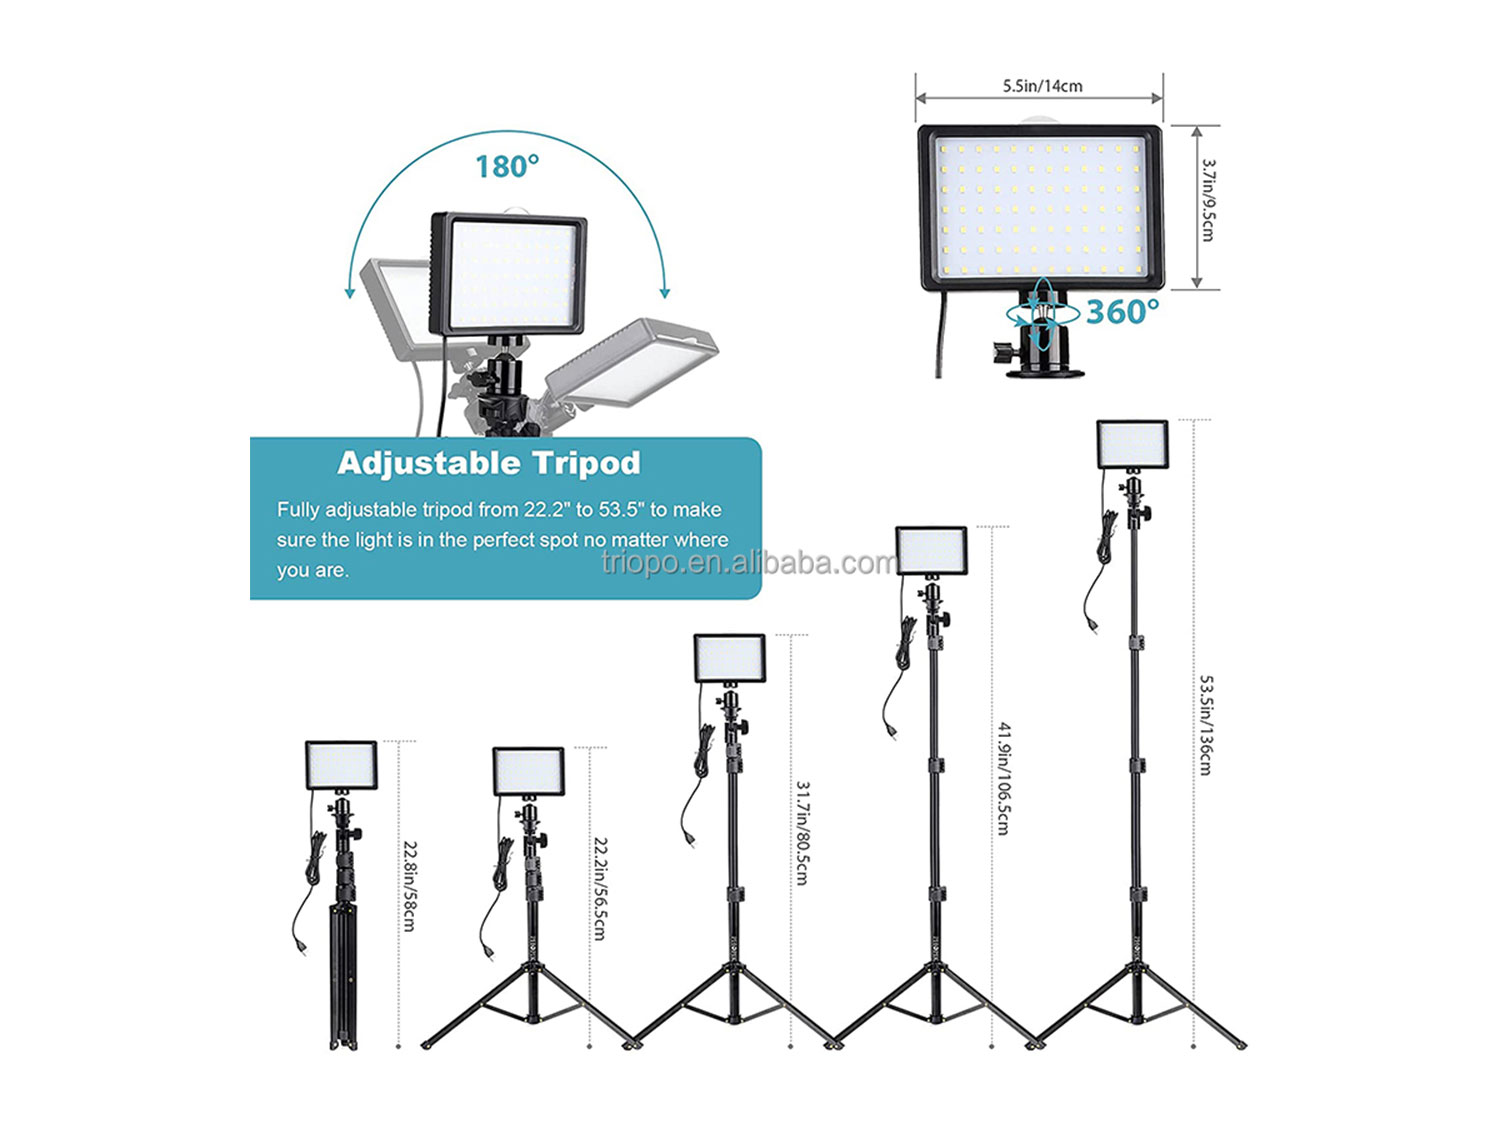 Compact and Portable Tripod Light Stand Ideal for Sri Lankan Photoshoots